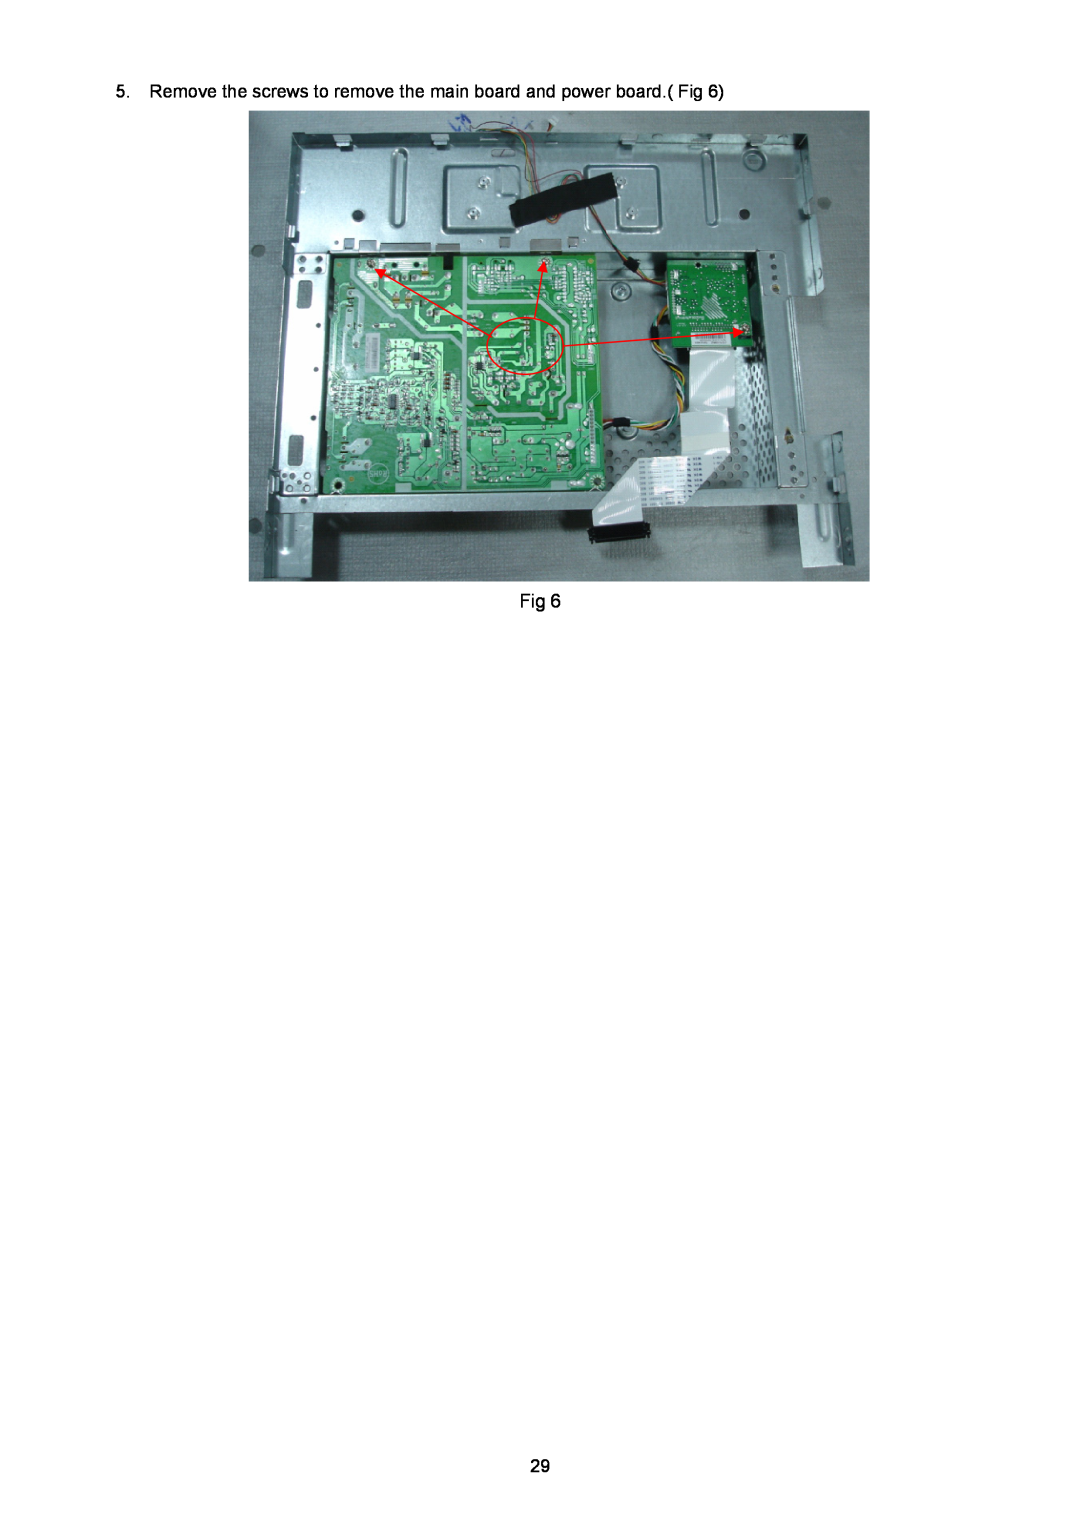 Acer B193R manual Remove the screws to remove the main board and power board. Fig 